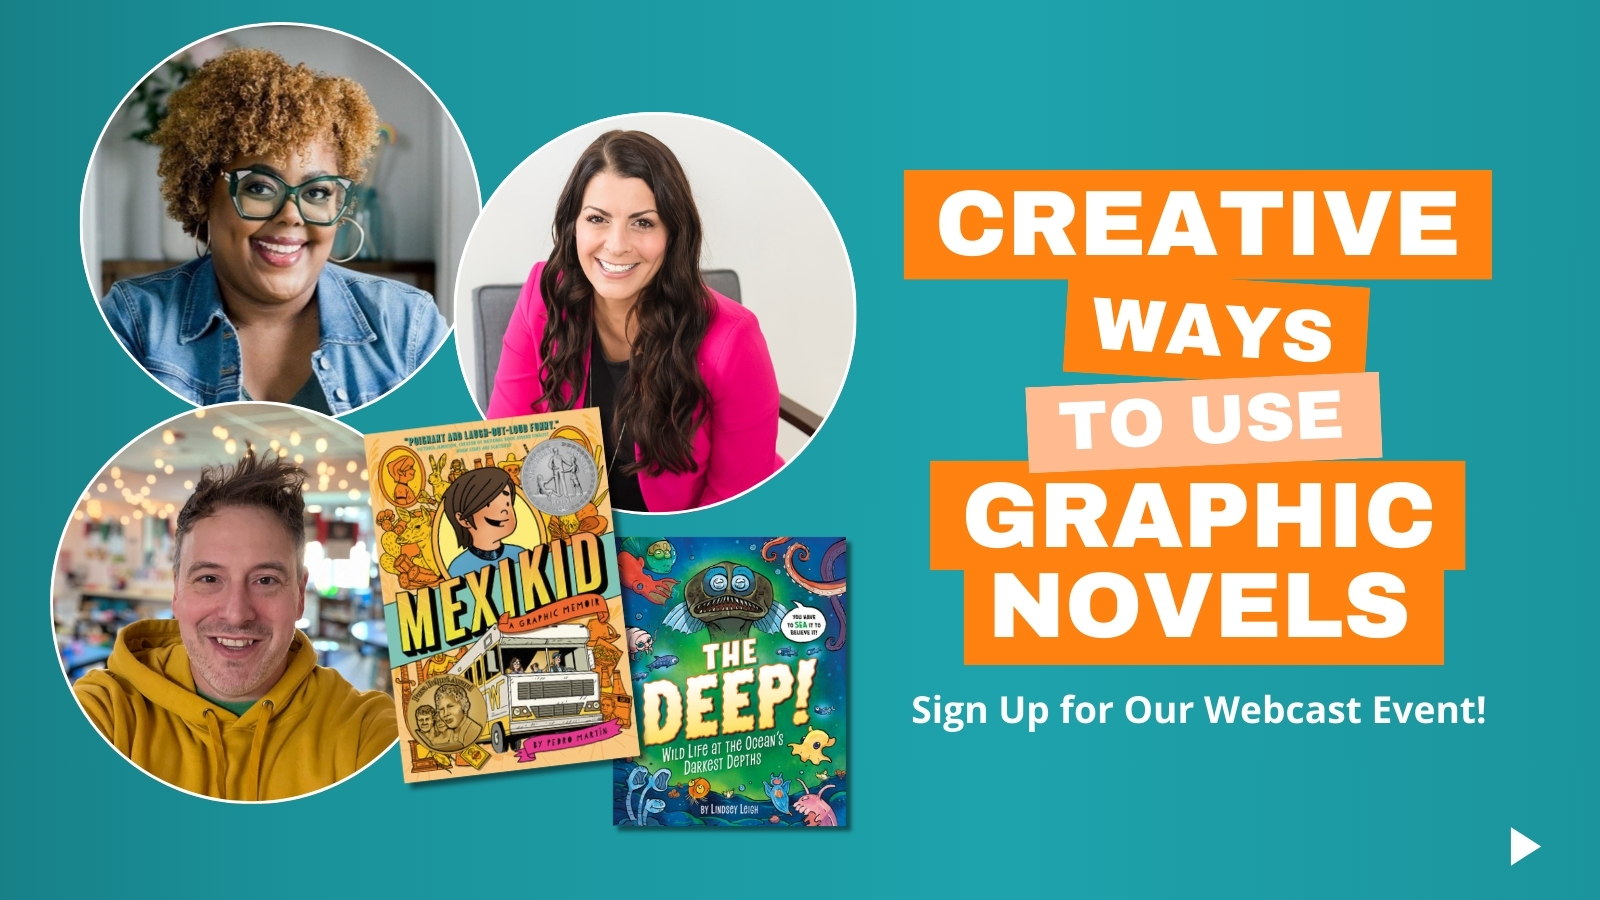 Webcast hosts with text 'Creative Ways to Use Graphic Novels'